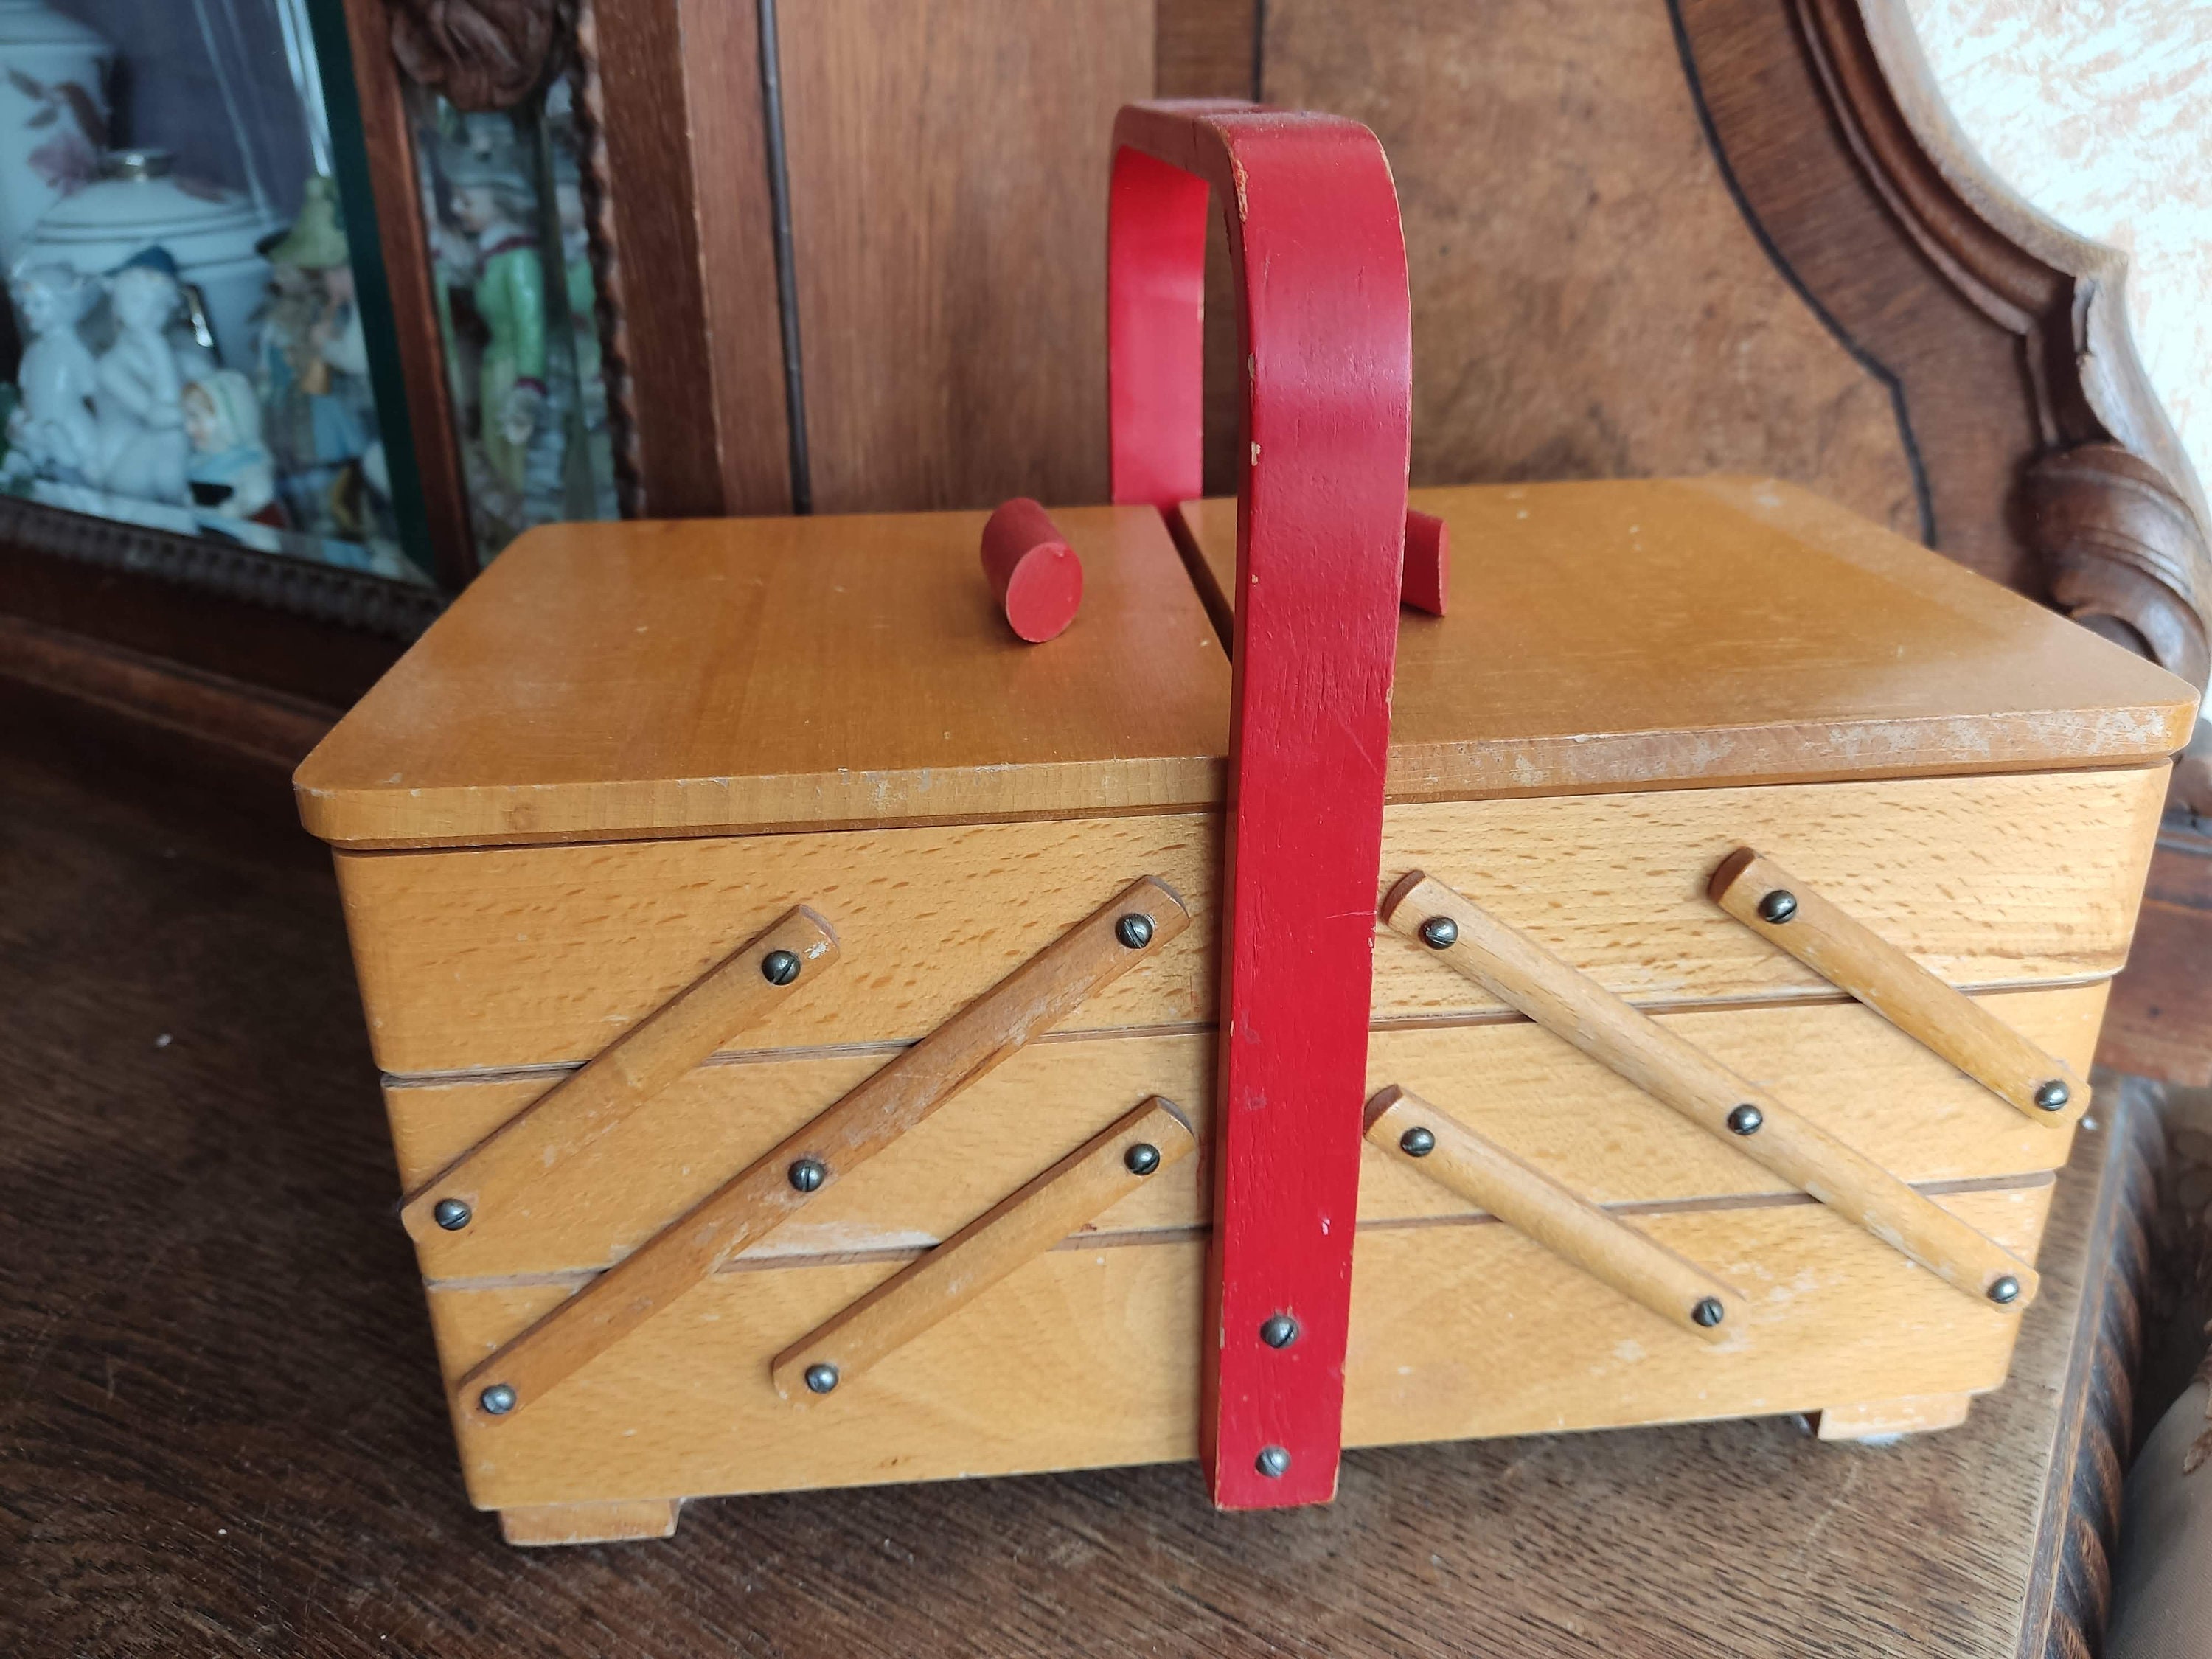 Wooden Sewing Box Organizer for Sewing Supplies with 3 Tier